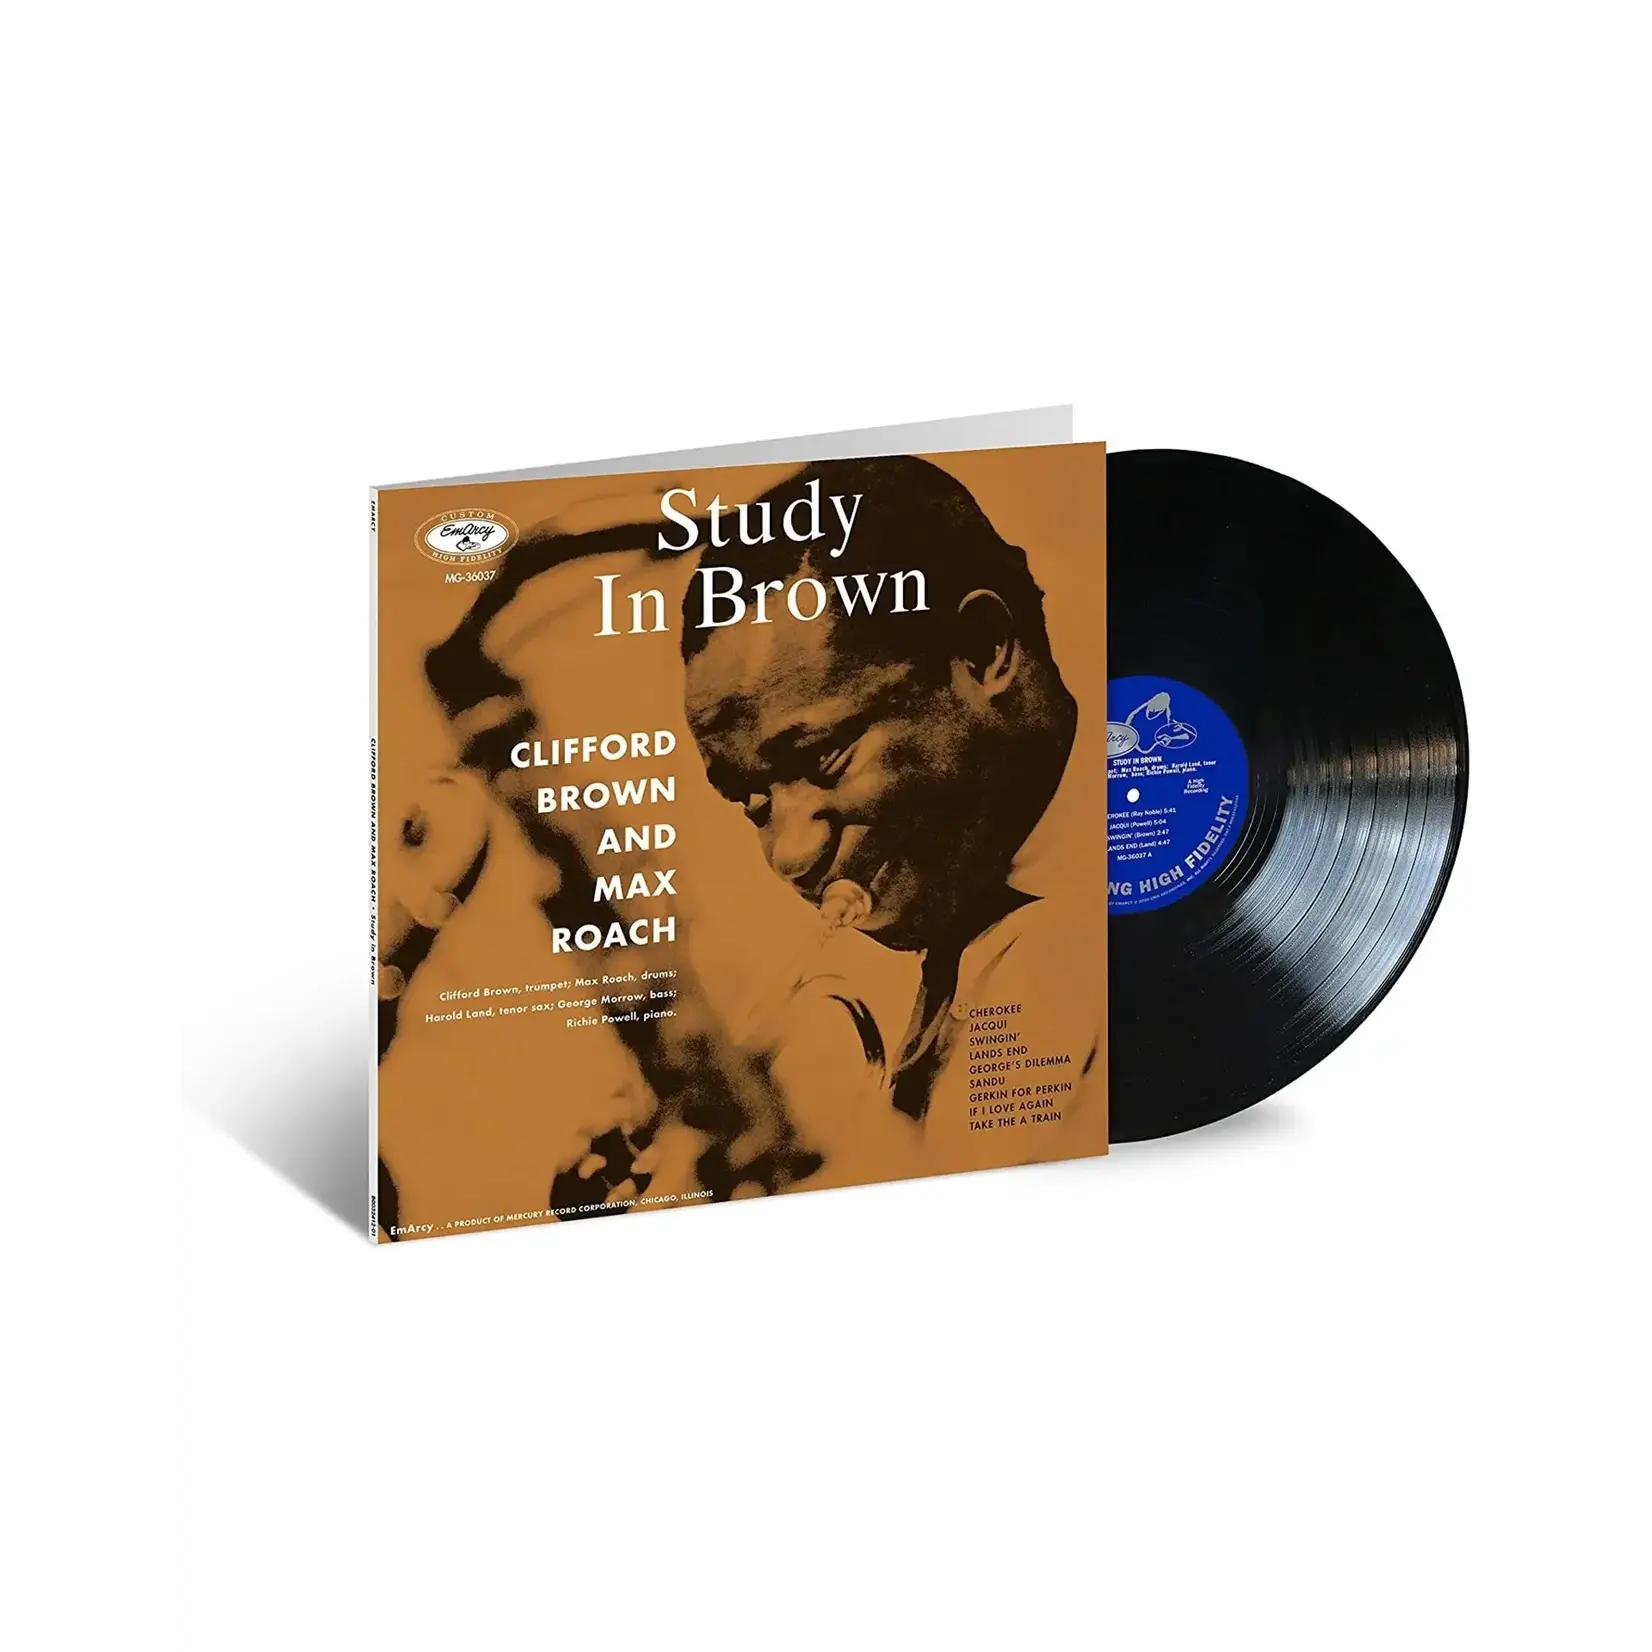 Clifford Brown/Max Roach - Study In Brown (Acoustic Sounds Series) [LP]